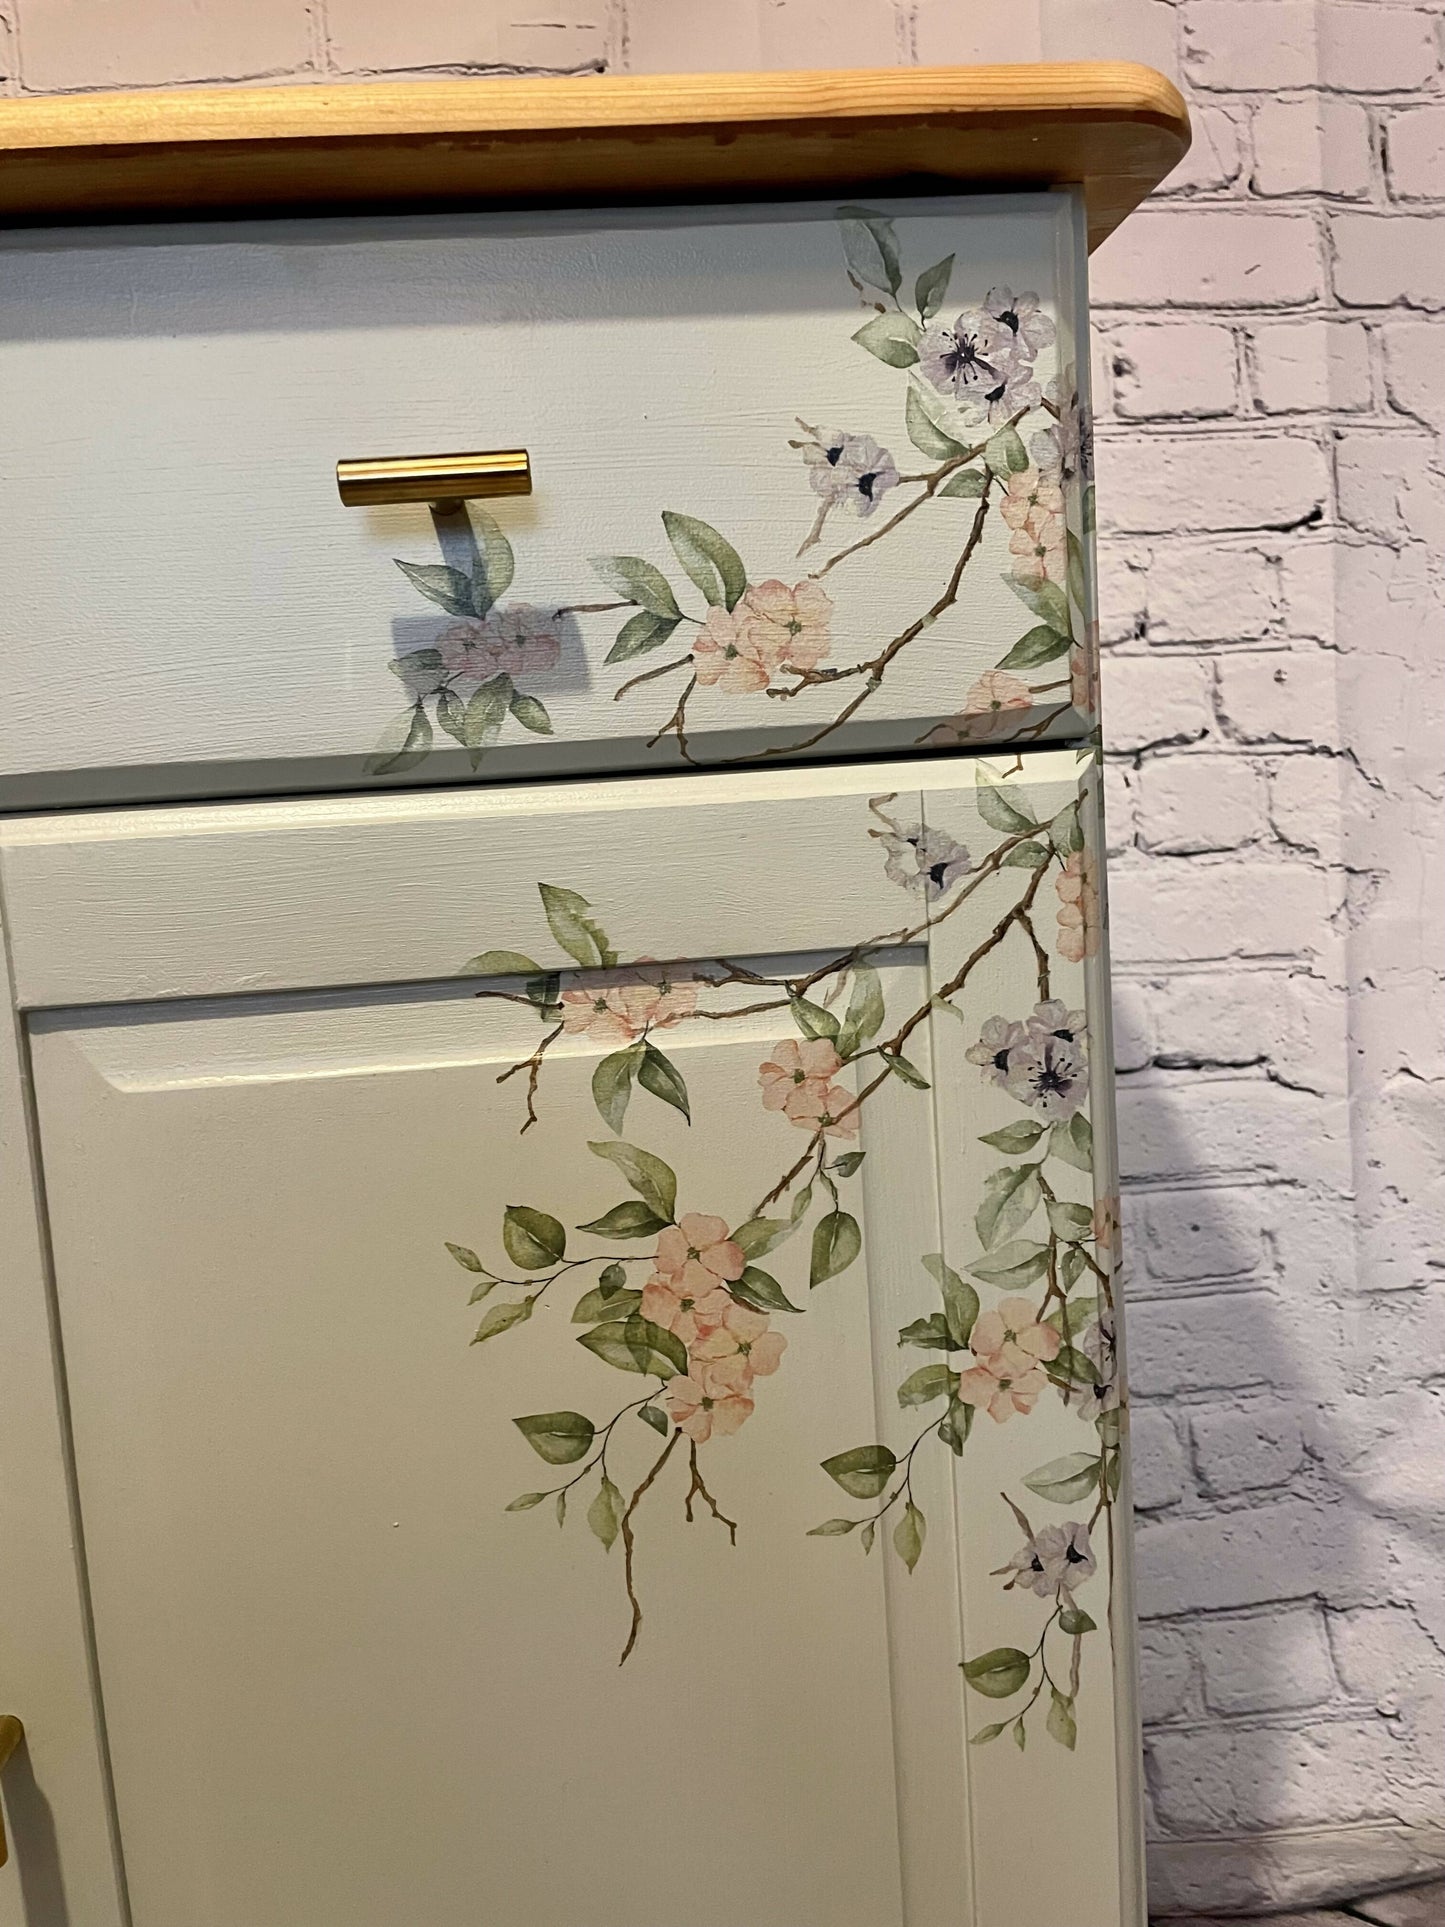 SOLD Hand painted grey/green sideboard with beautiful cherry blossom decoupaged flowers